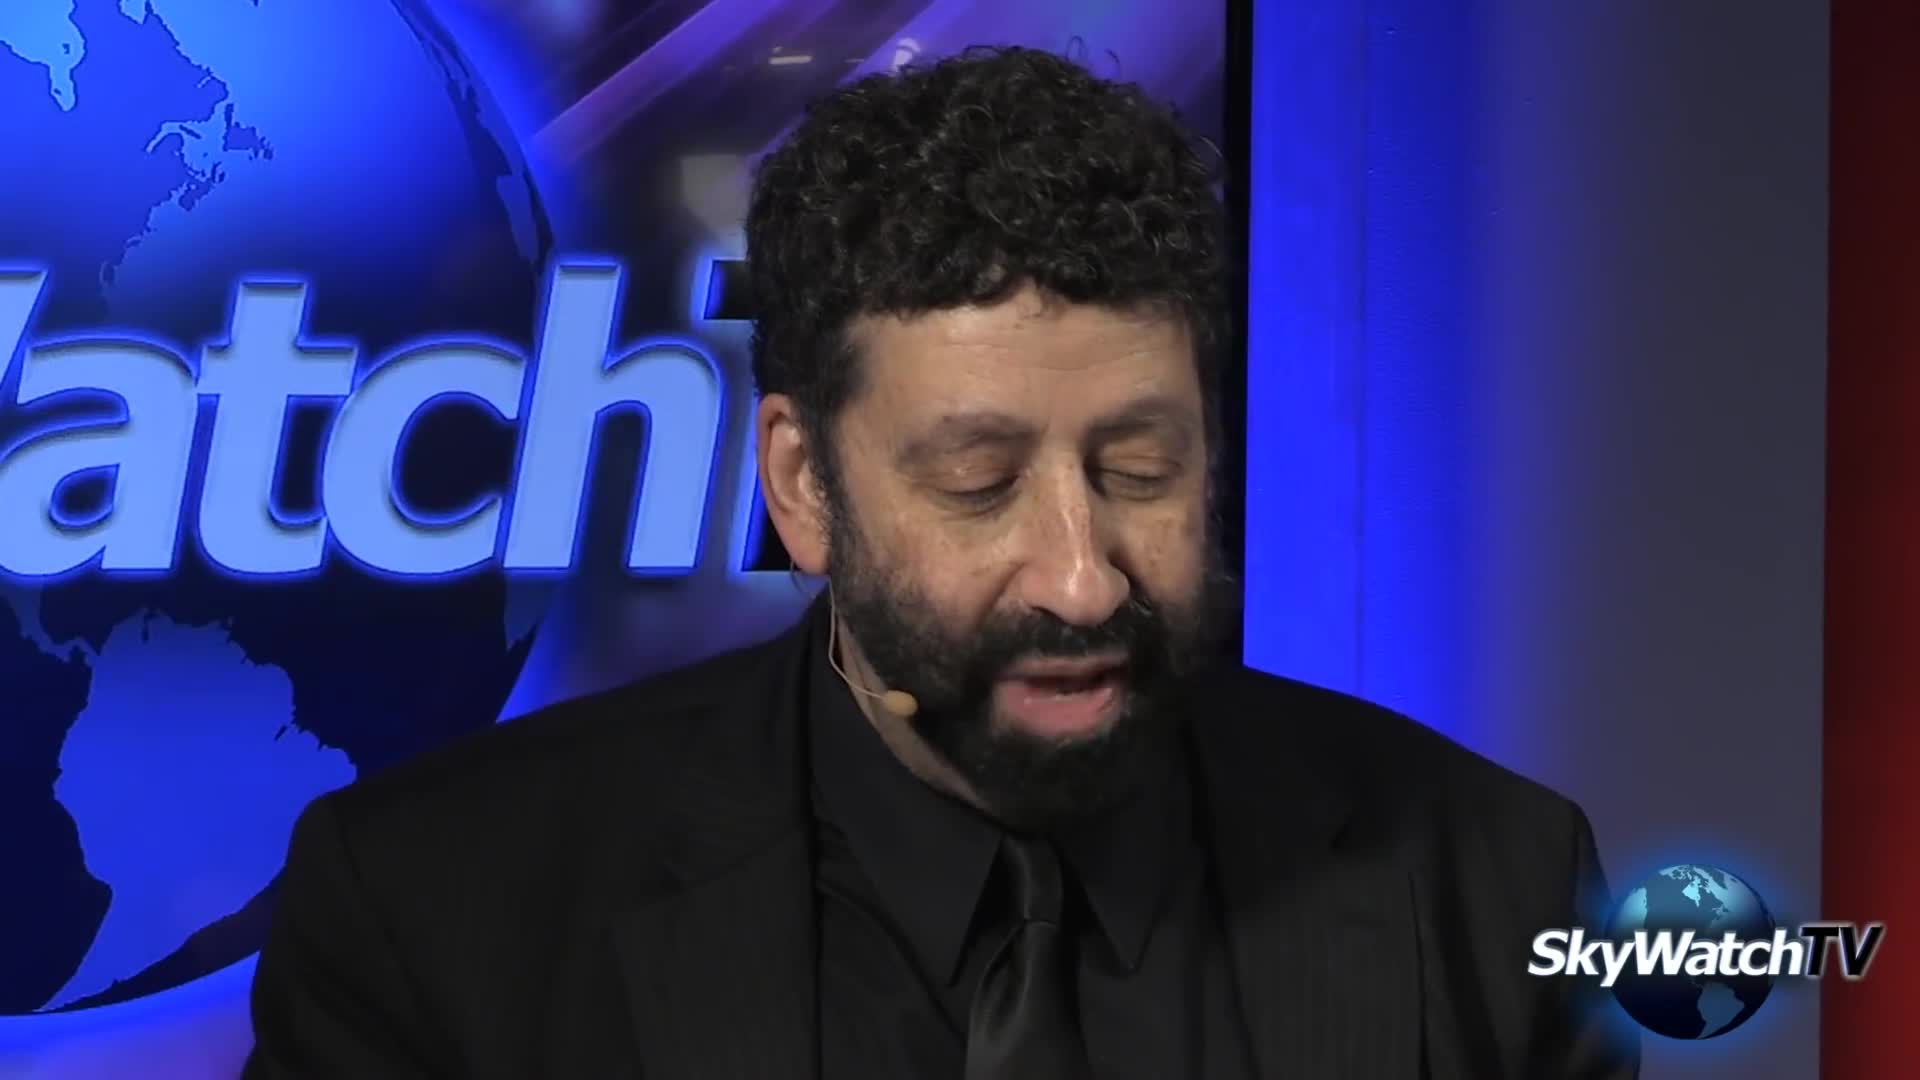 SkyWatchTV - Jonathan Cahn Appears On SkyWatch TV To Unlock Greatest Mystery Of Our Time